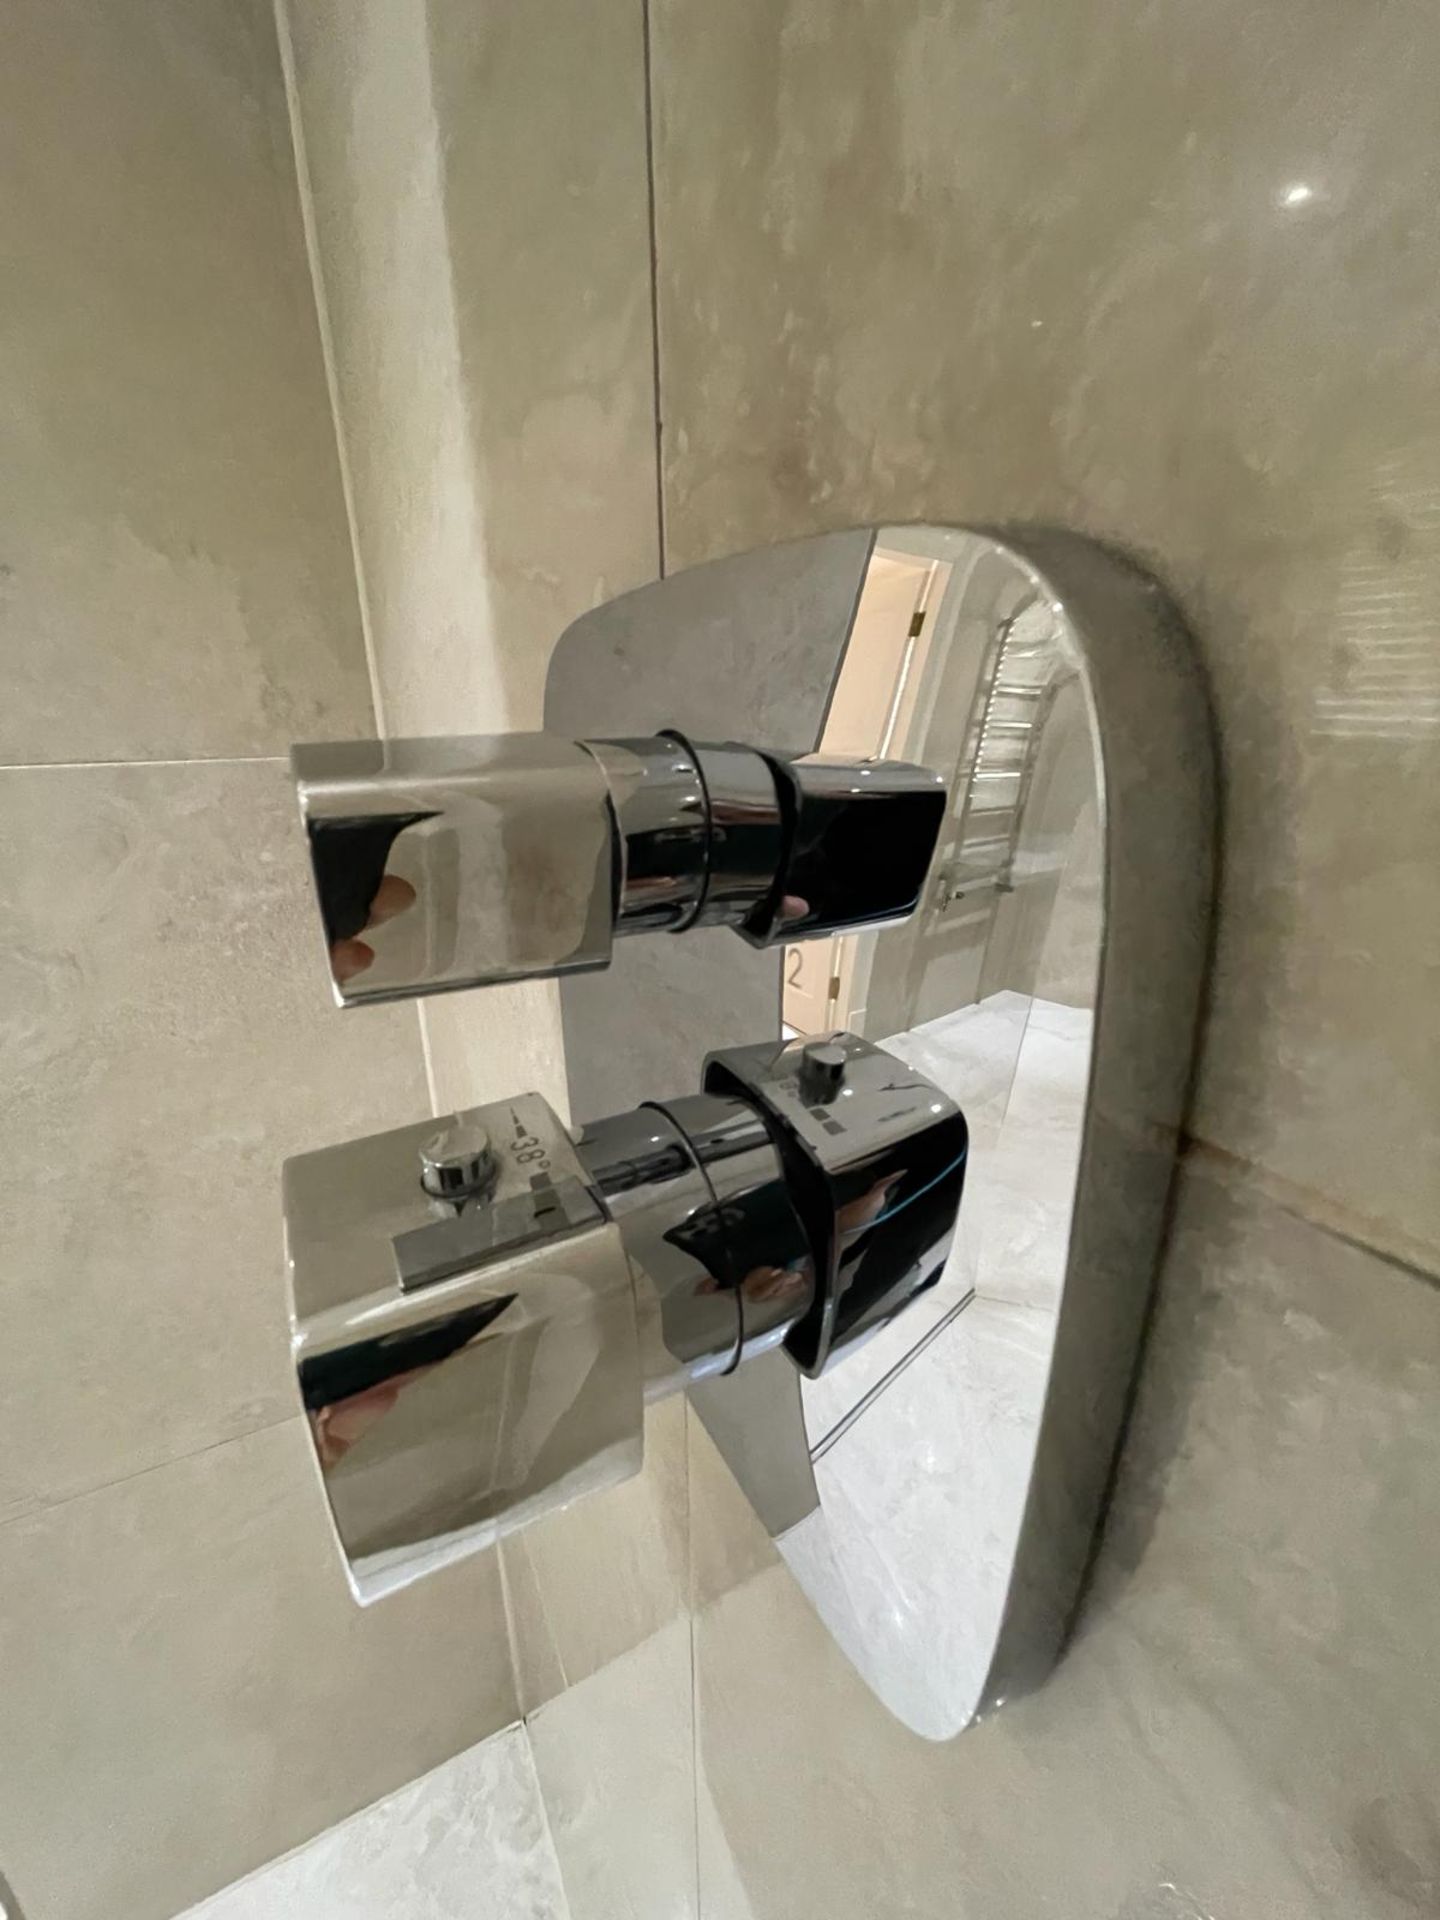 1 x Premium Shower and Enclosure + hansgrohe Controls and Thermostat - Ref: PAN251 / Bed2bth - CL896 - Bild 3 aus 15